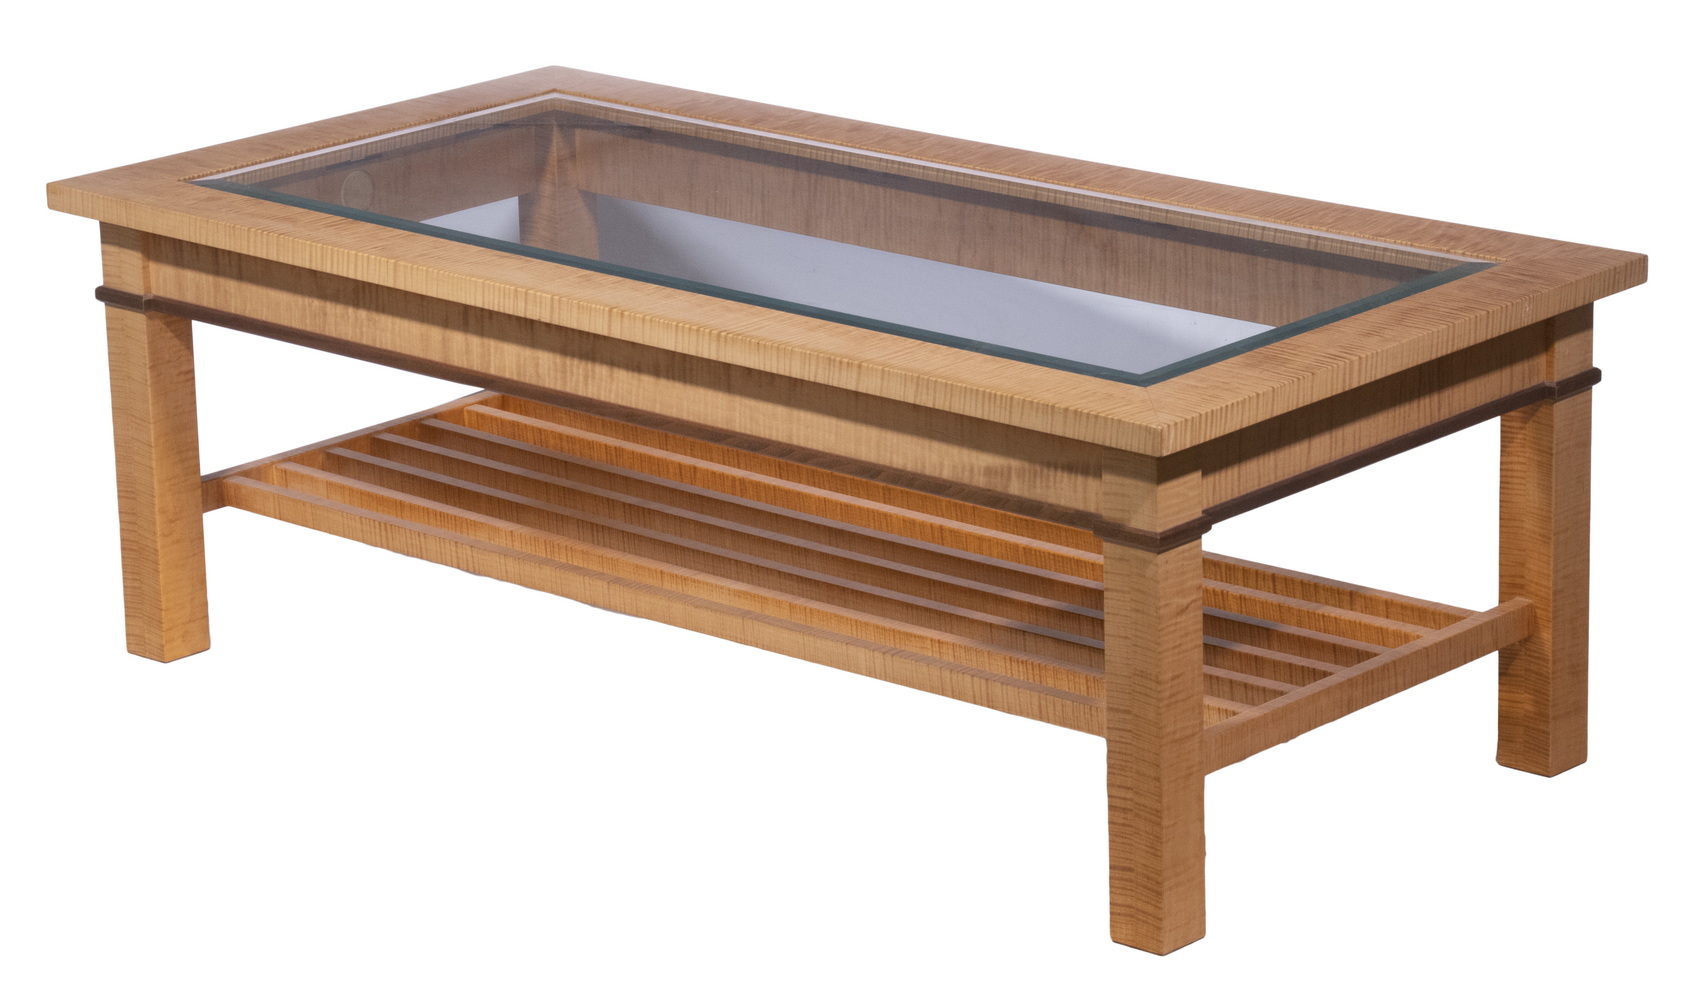 TIGER MAPLE COFFEE TABLE WITH INSET 302c40